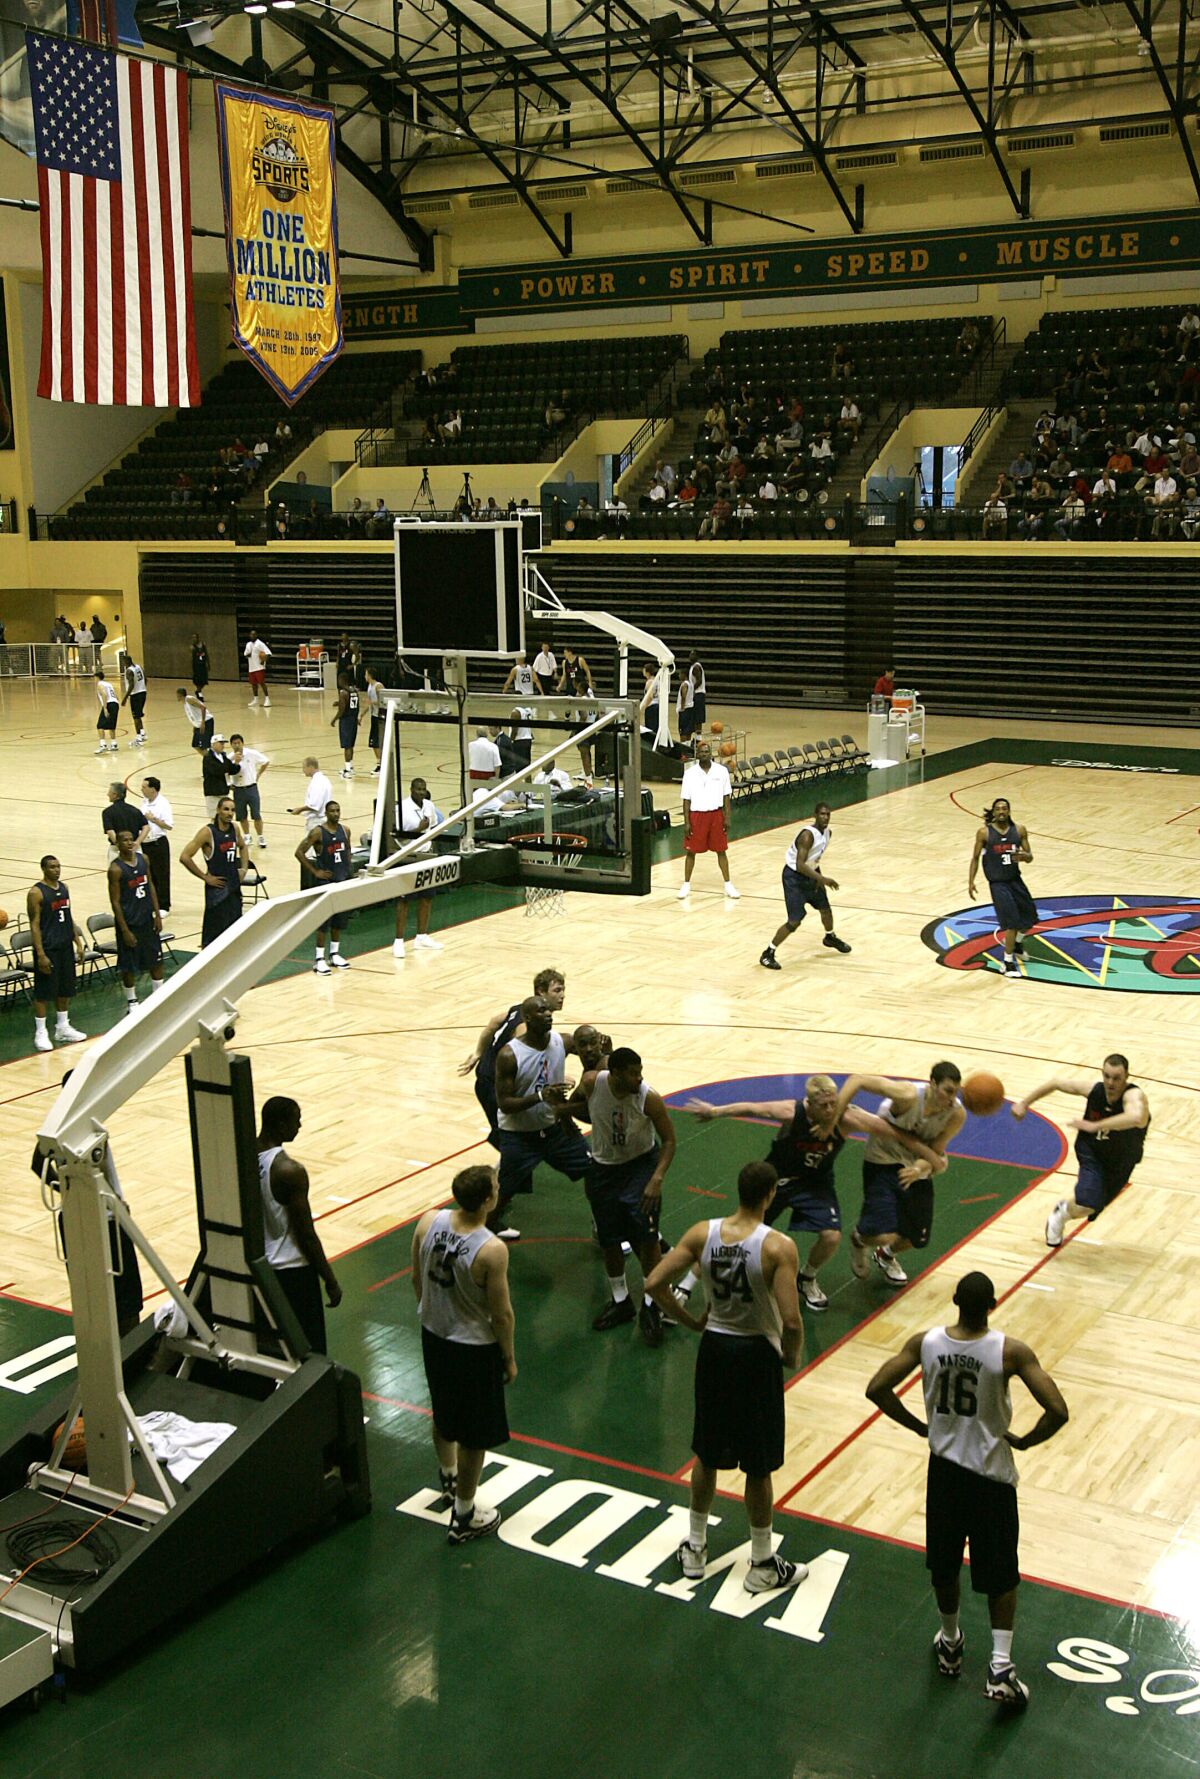 FILE - In this June 6, 2006, file photo, college players scrimmage during an NBA pre-draft basketball camp at the Disney Wide World of Sports complex in Kissimmee, Fla. Most of the 22 remaining NBA teams were taking the court for the first mandatory workouts in nearly four months Wednesday, July 1, 2020, as the league continued prepping for the restart of the season at the Disney campus near Orlando, Florida. Workouts are still individual in nature, but are no longer voluntary. (AP Photo/John Raoux, File)